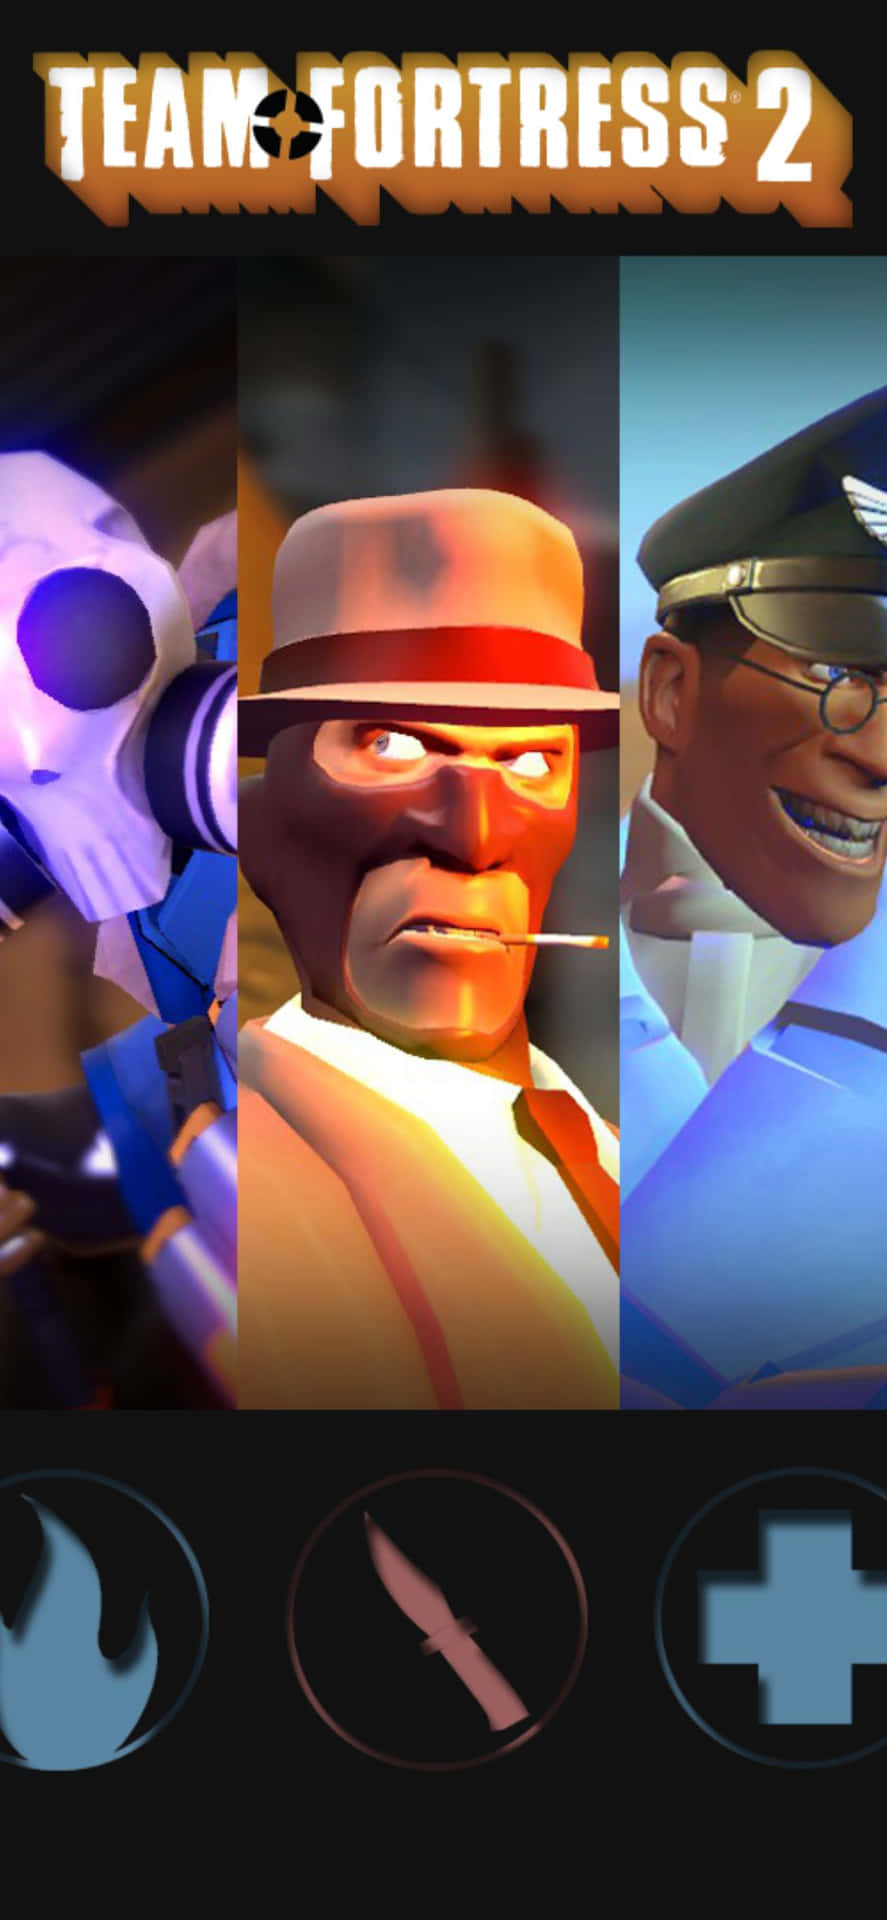 Capture the flag with your friends and show dominance with Team Fortress 2 on your new iPhone Xs